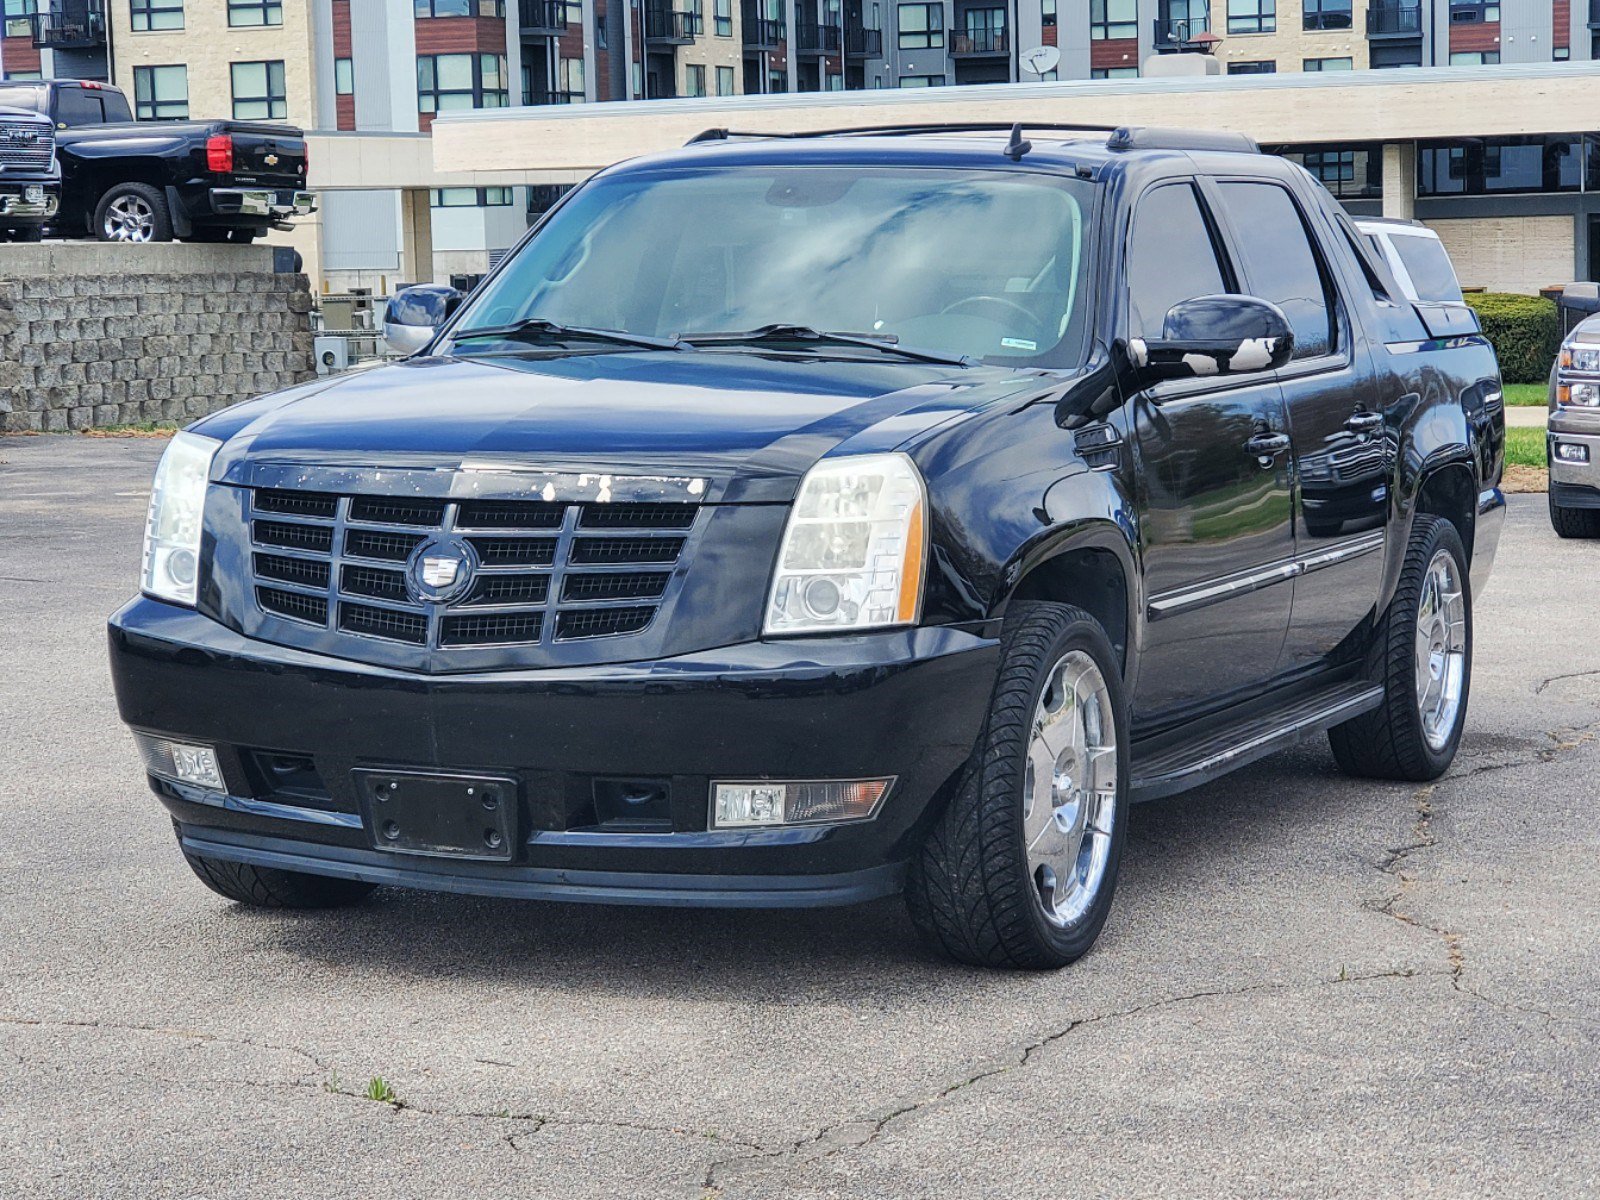 Pre-Owned 2009 Cadillac Escalade AWD 4dr Crew Cab in Lincoln #4U8503B | Sid  Dillon Buick of Lincoln